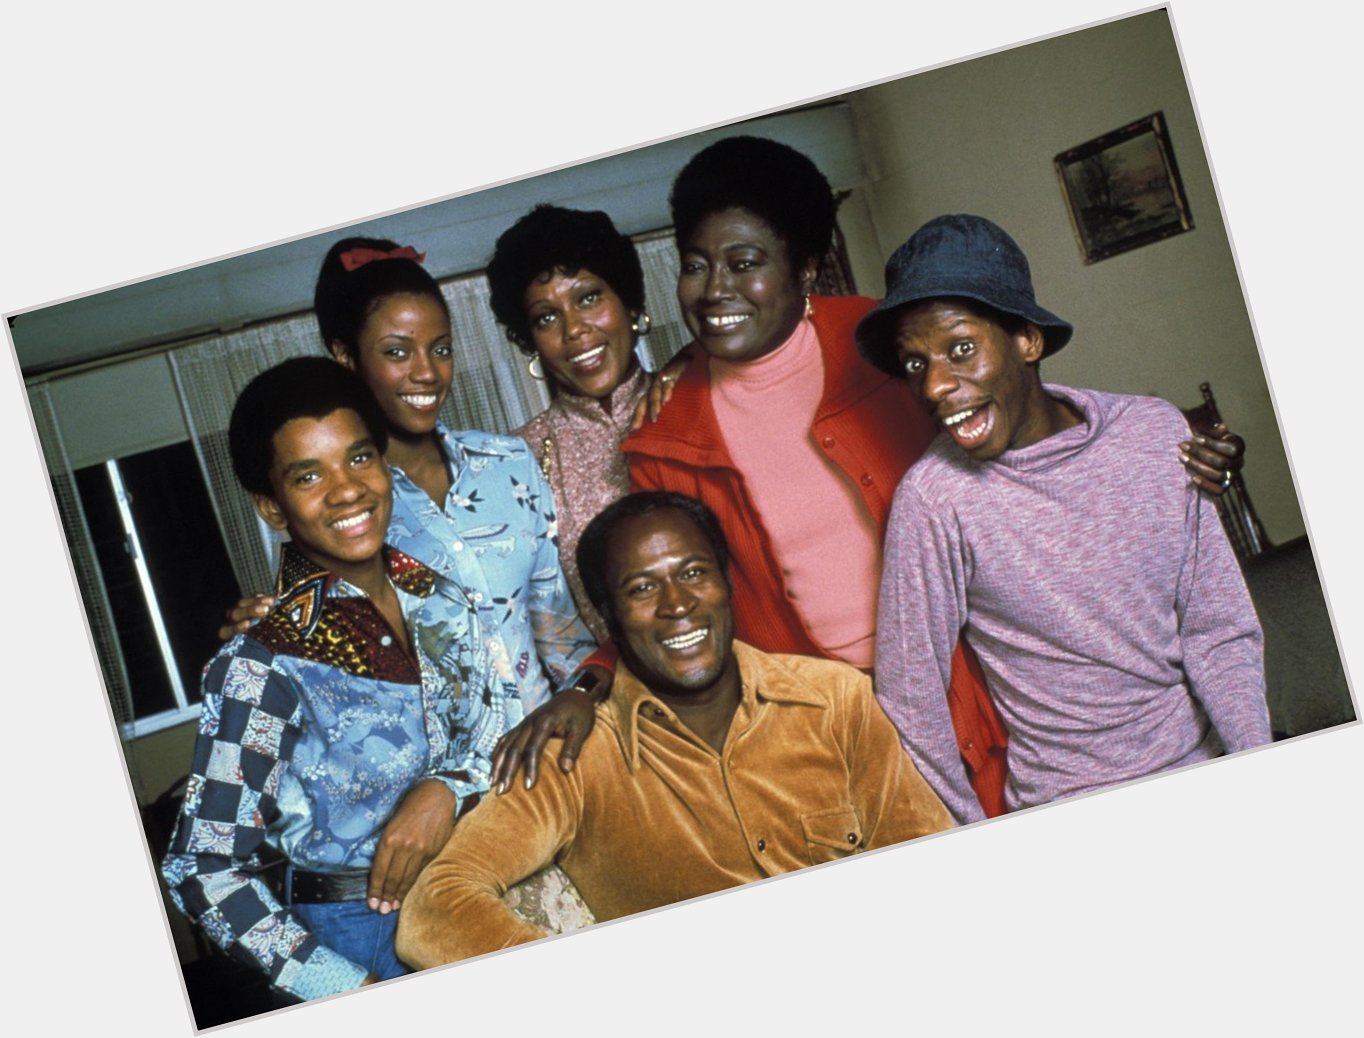 Happy birthday to John Amos Jr. of Good Times, who was born in 